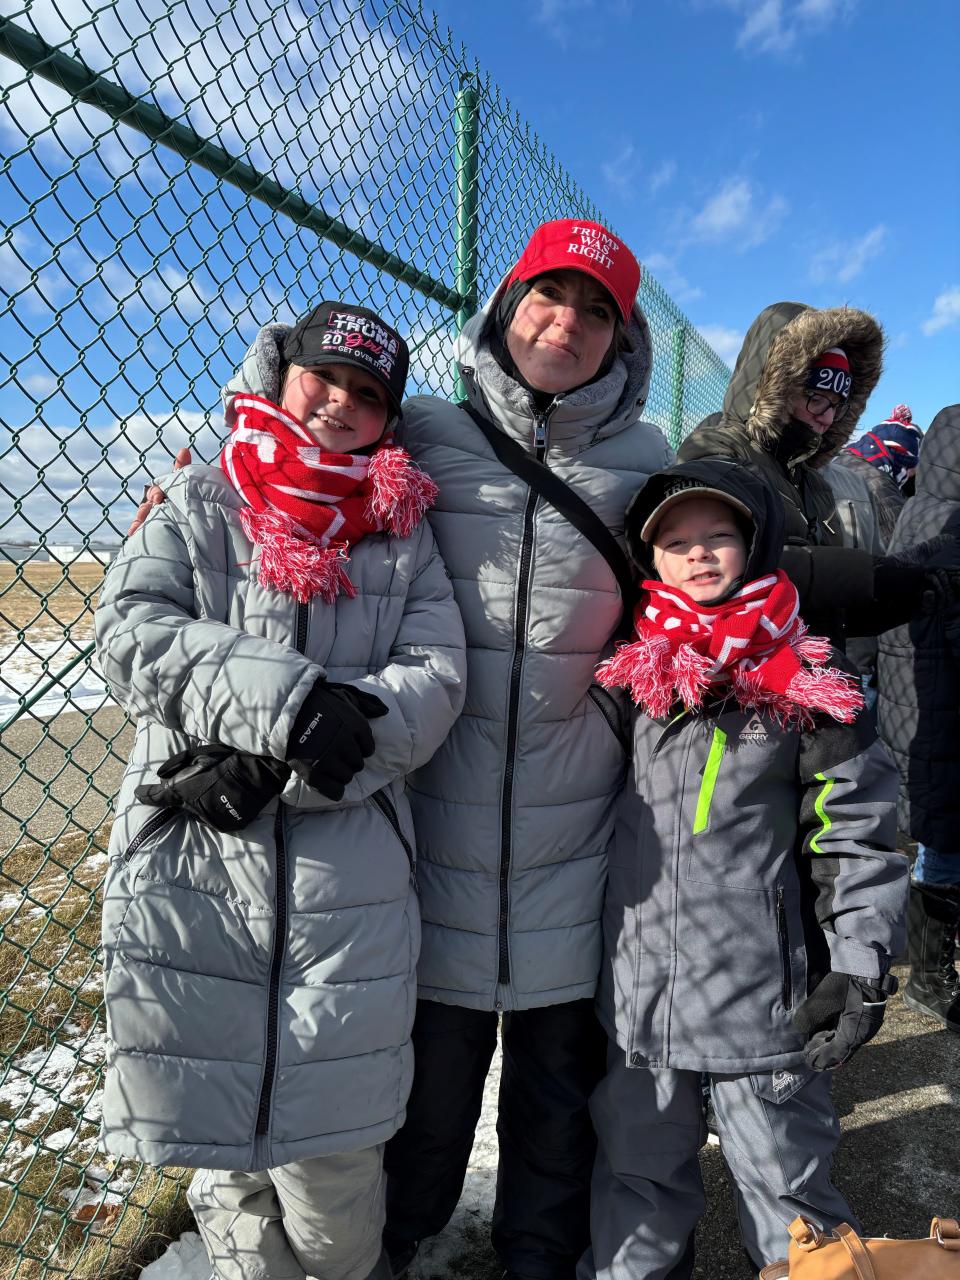 Missy Prill, 37, drove from Grand Rapids to Waterford to see former President Donald Trump with her daughter, Kayleigh, 10, and her son, Oliver, 8.